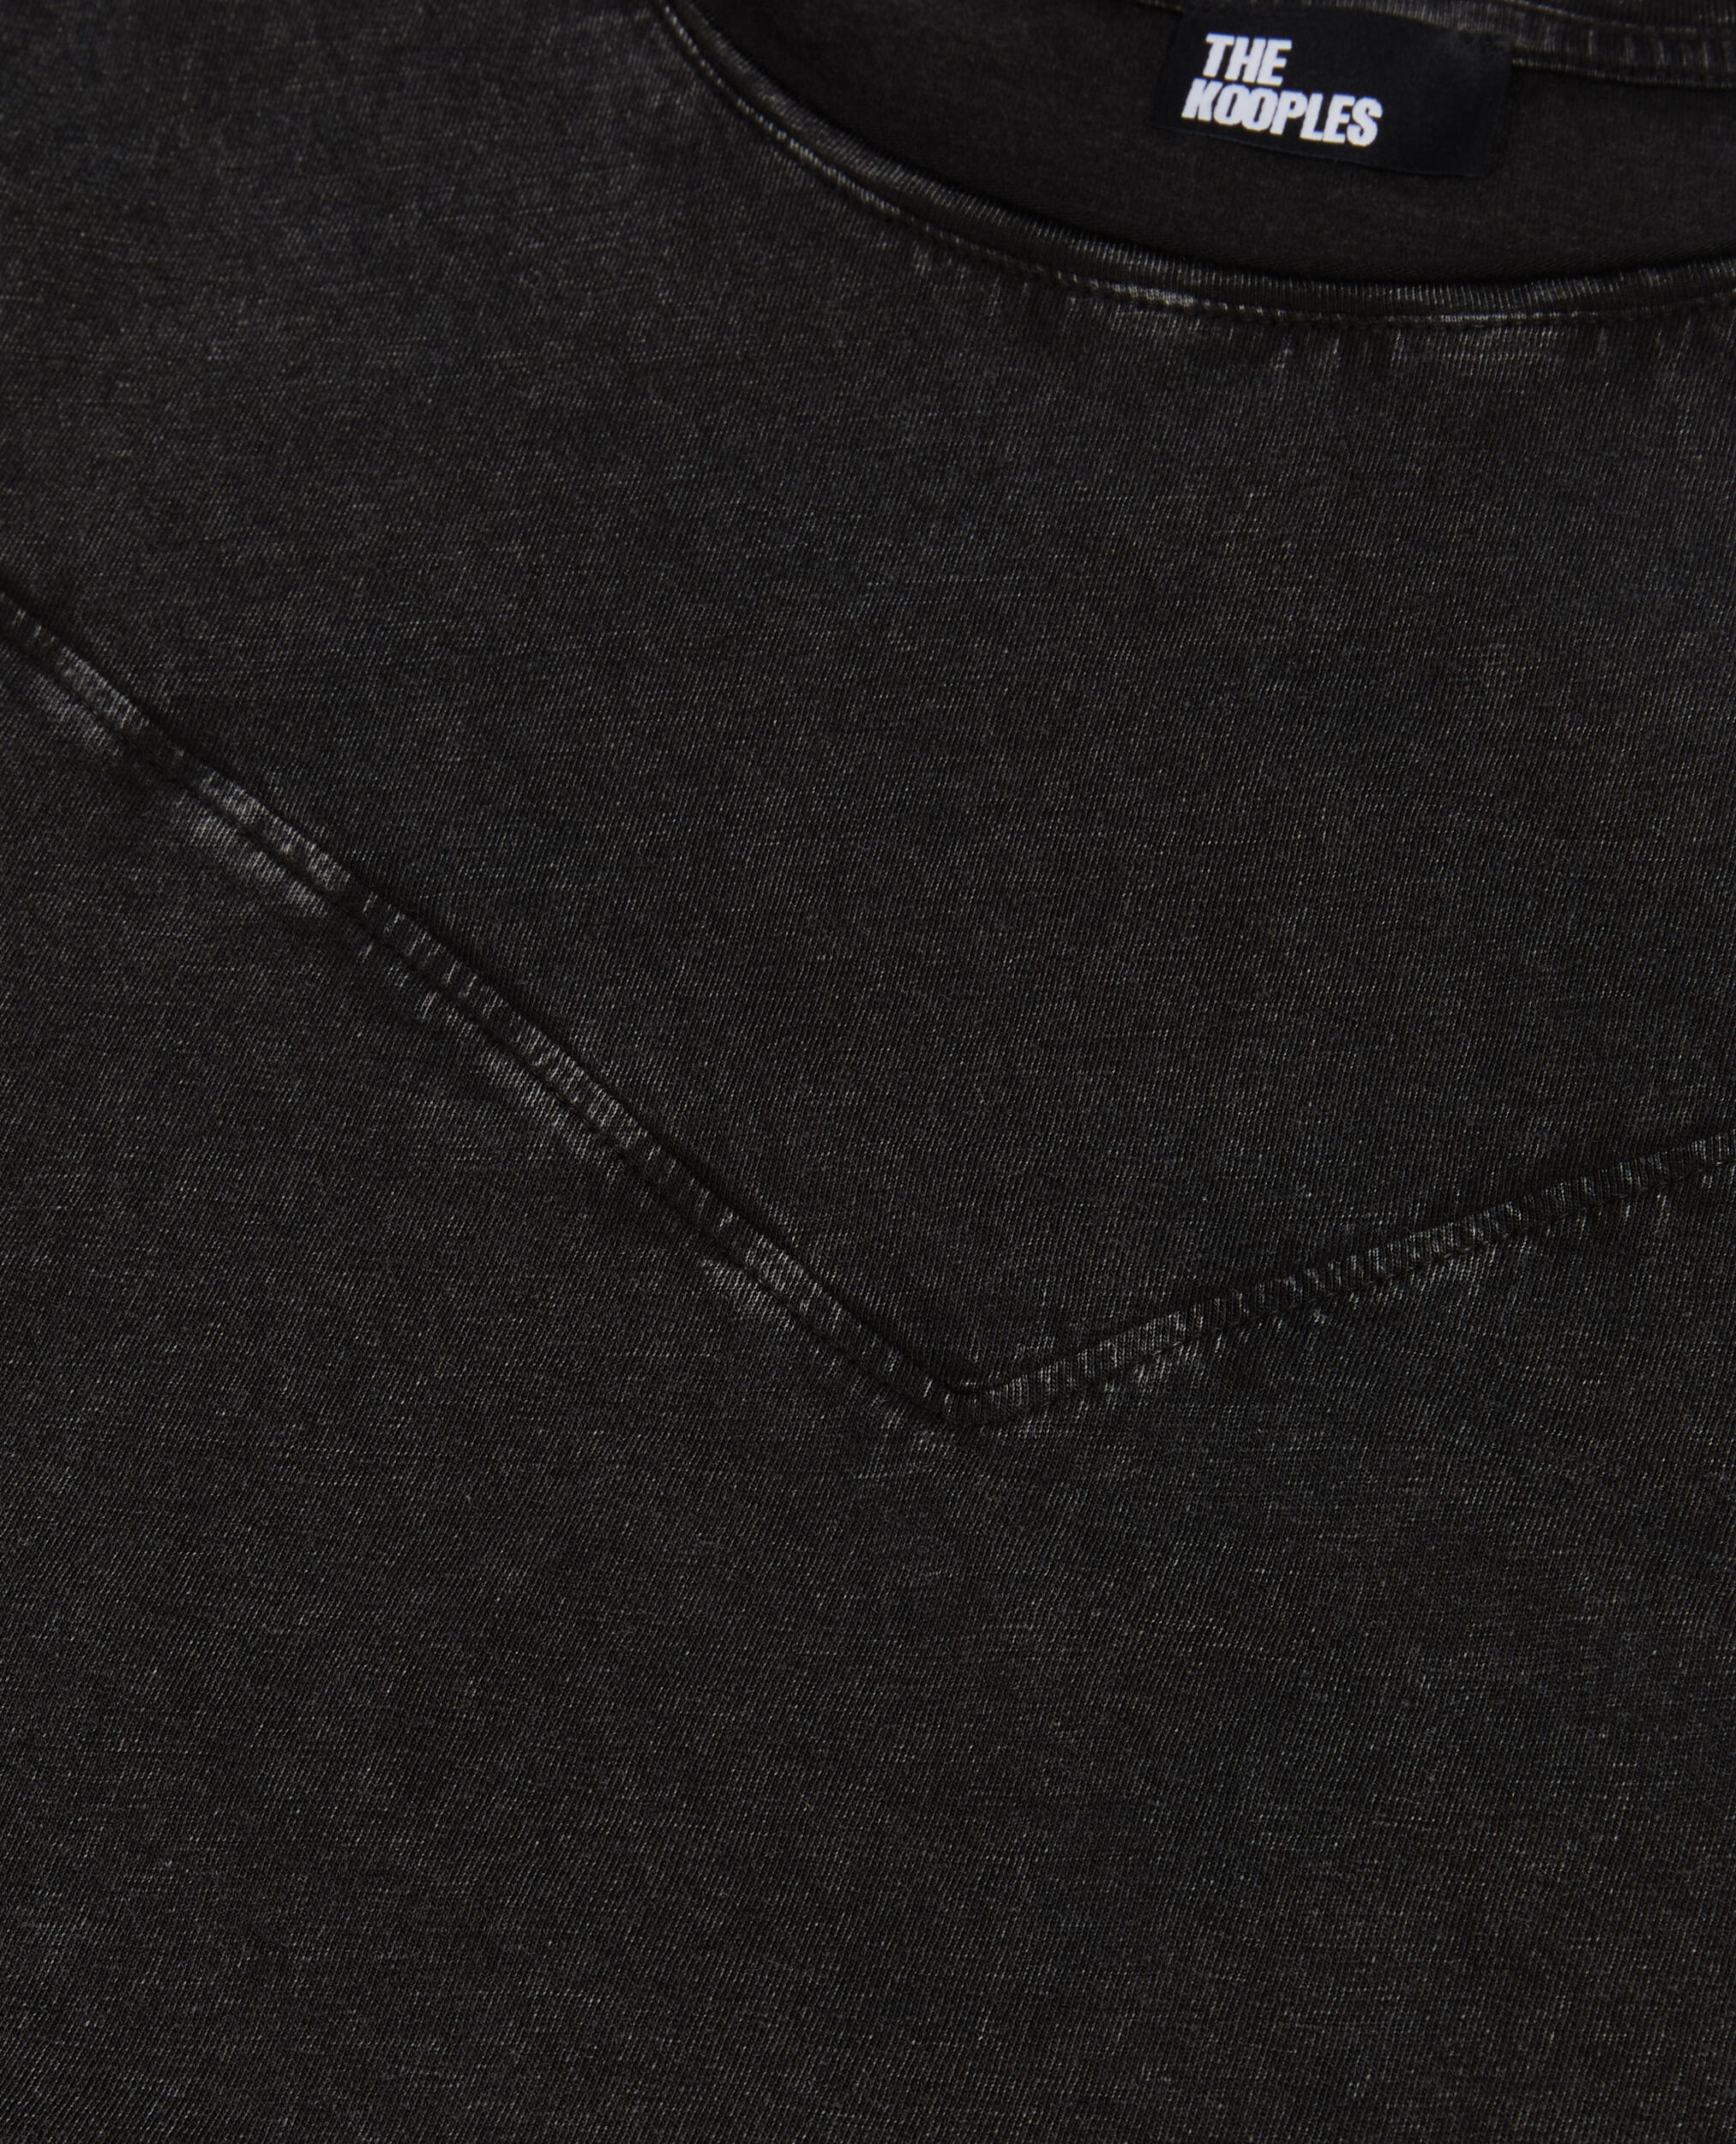 Black t-shirt with lacing, BLACK WASHED, hi-res image number null